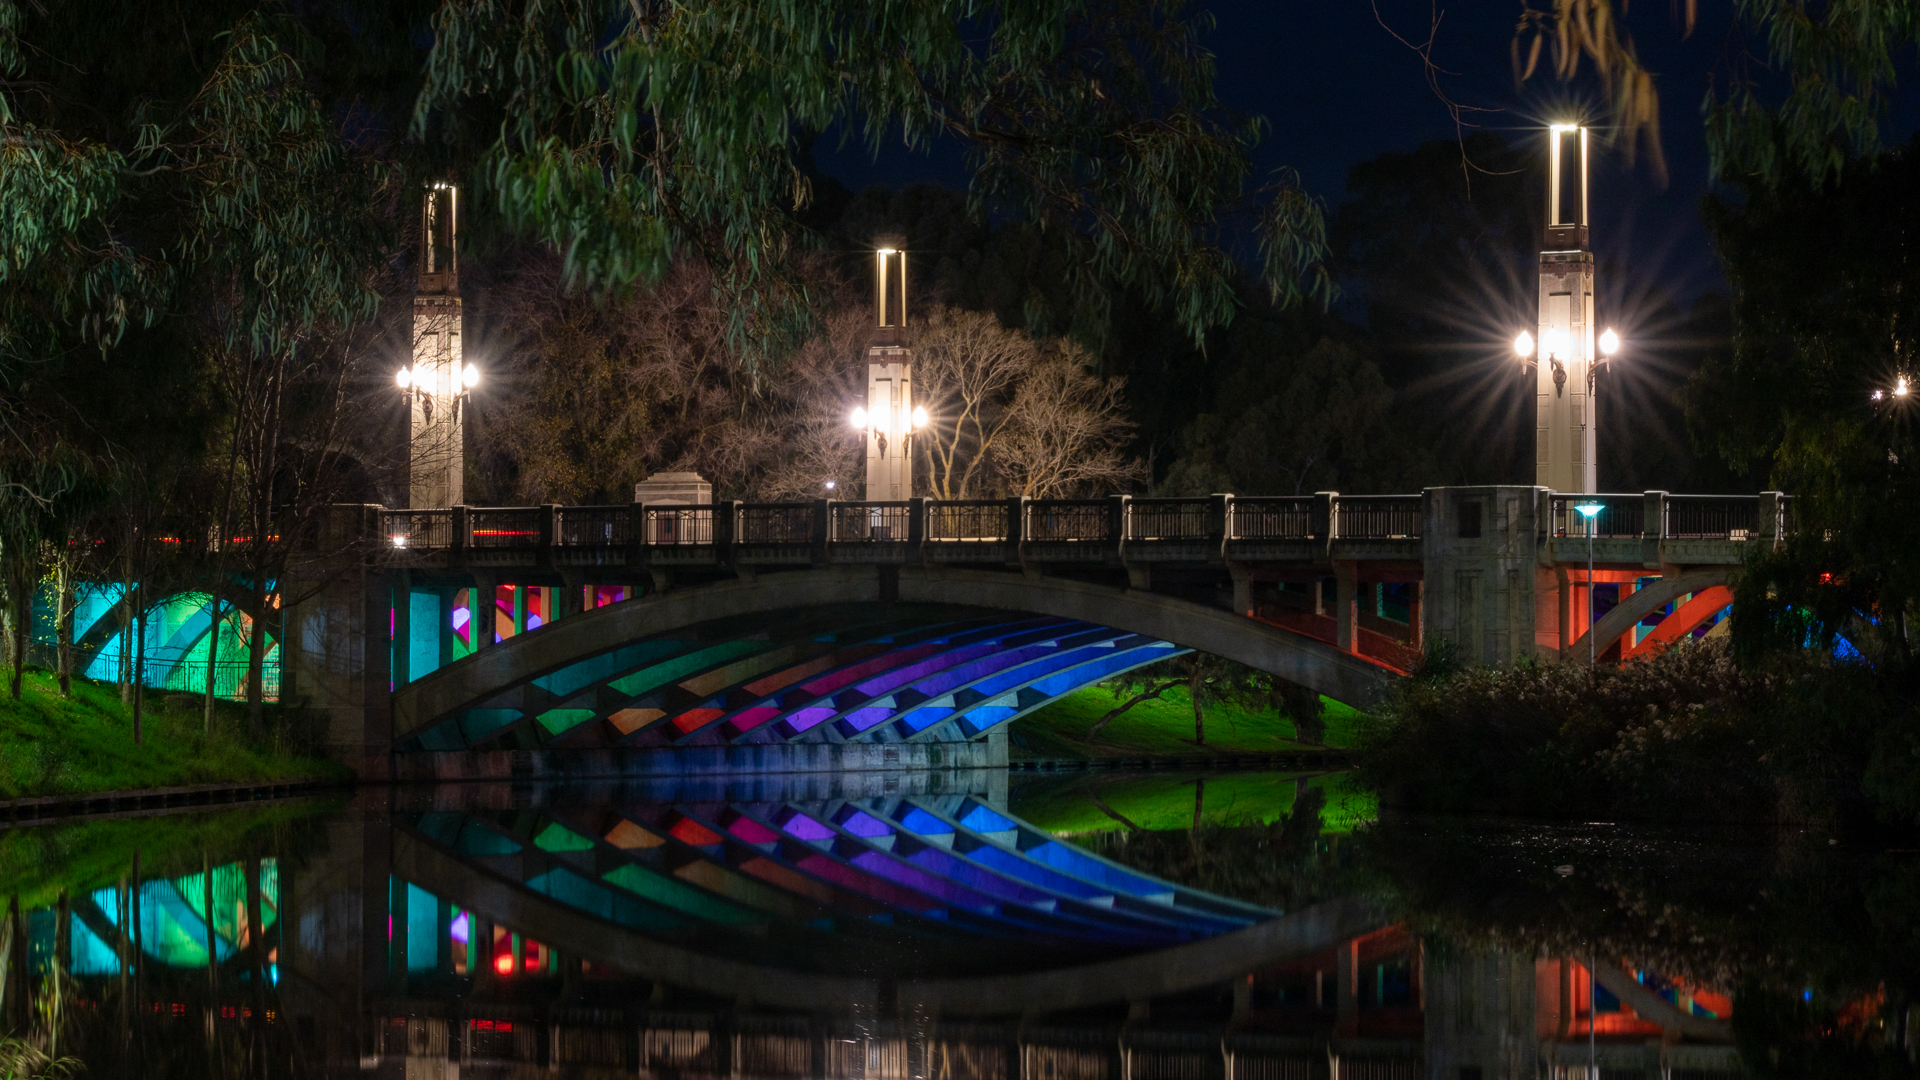 Highly Commended Donald Owers Old Bridge by Night 8 September 2020   Night Photography